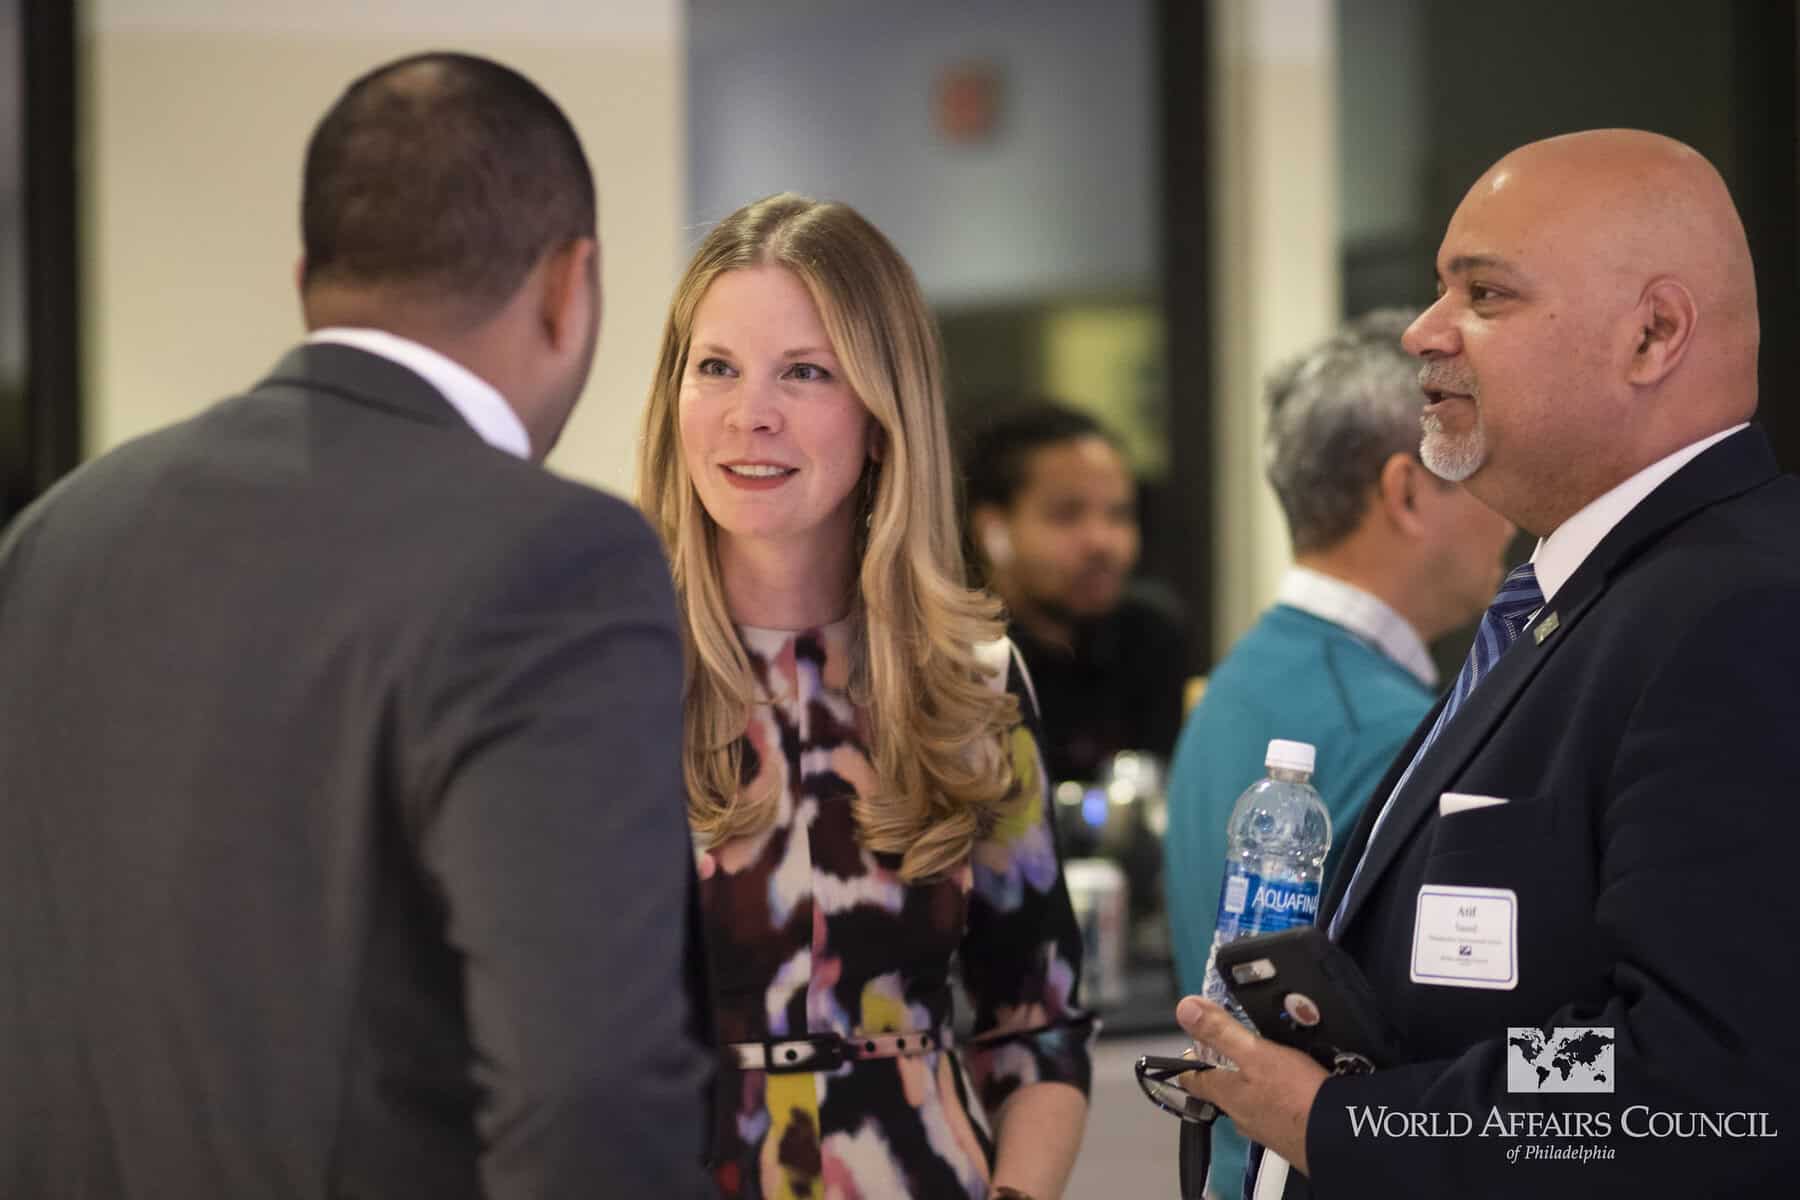 Finding her home at the World Affairs Council